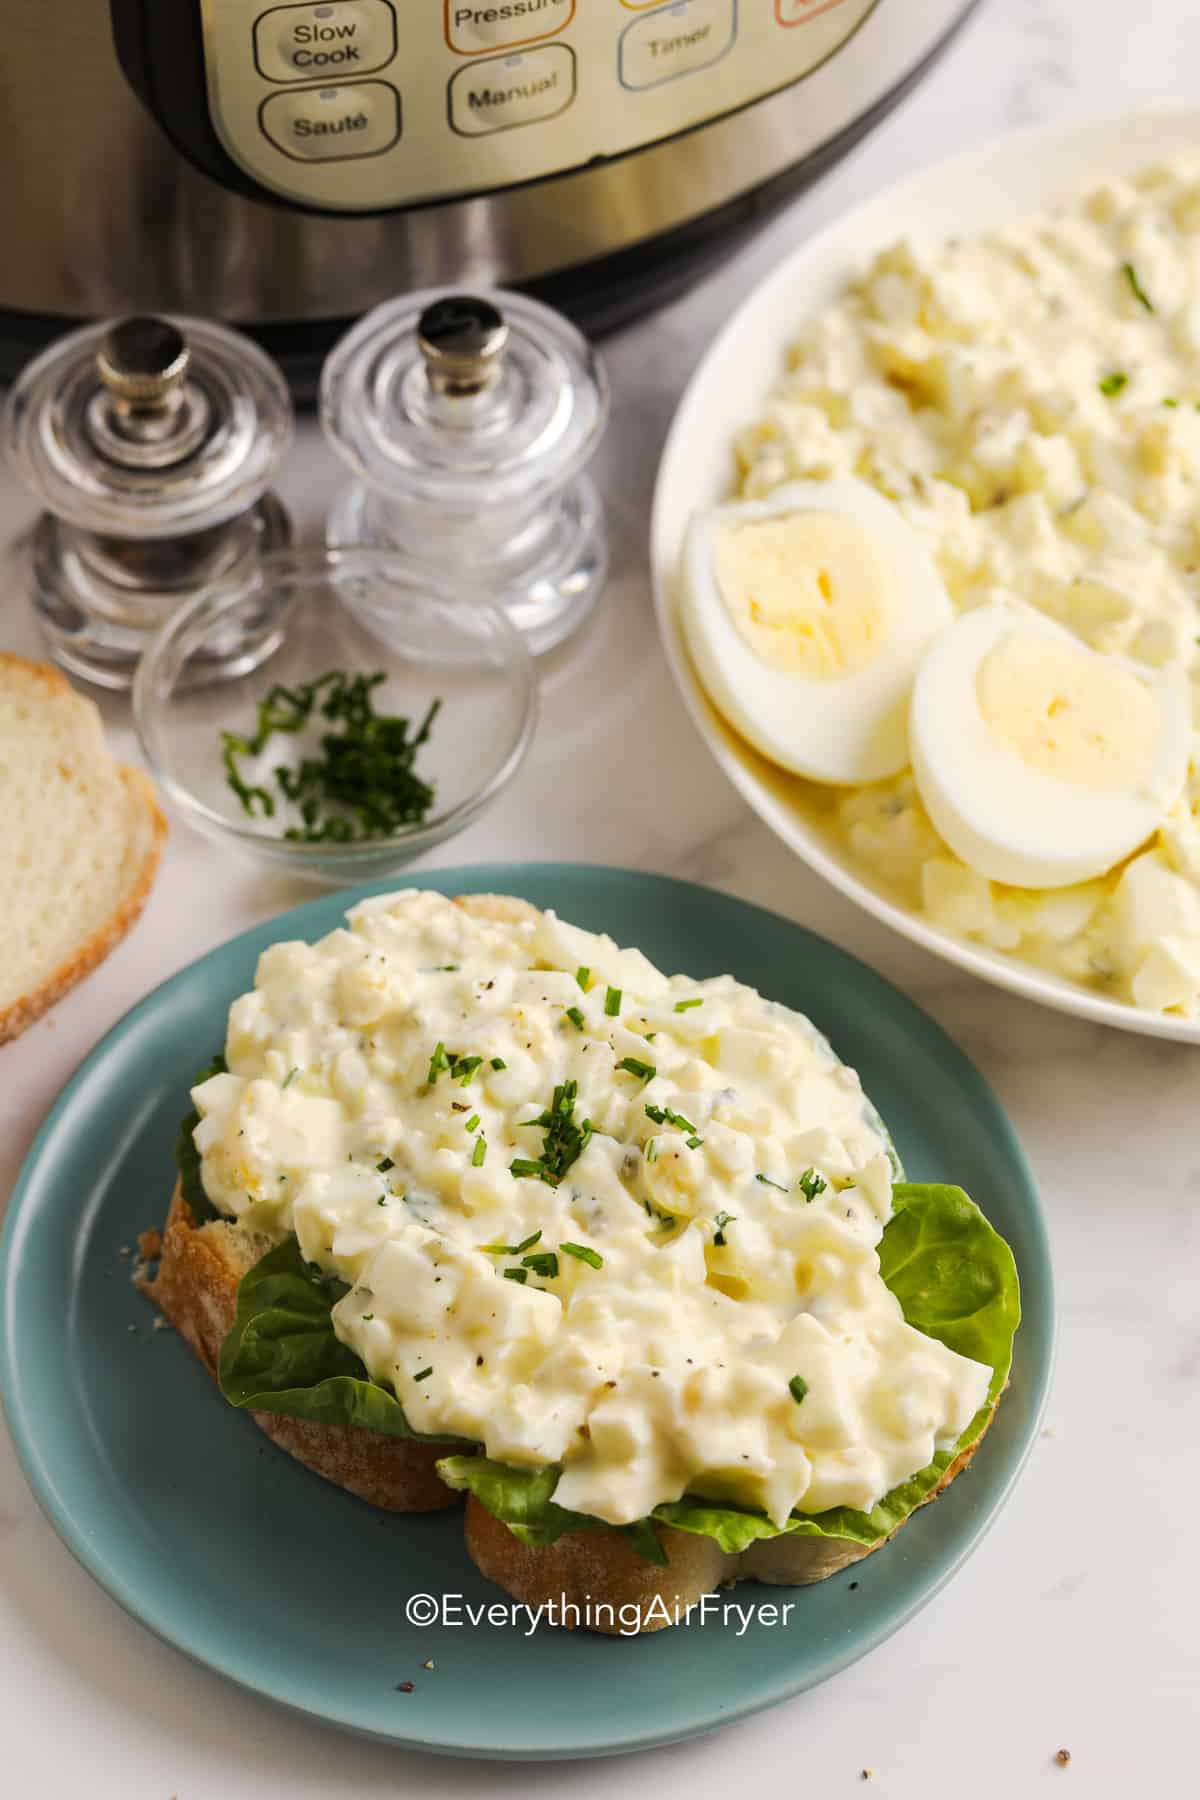 Egg salad and lettuce on bread